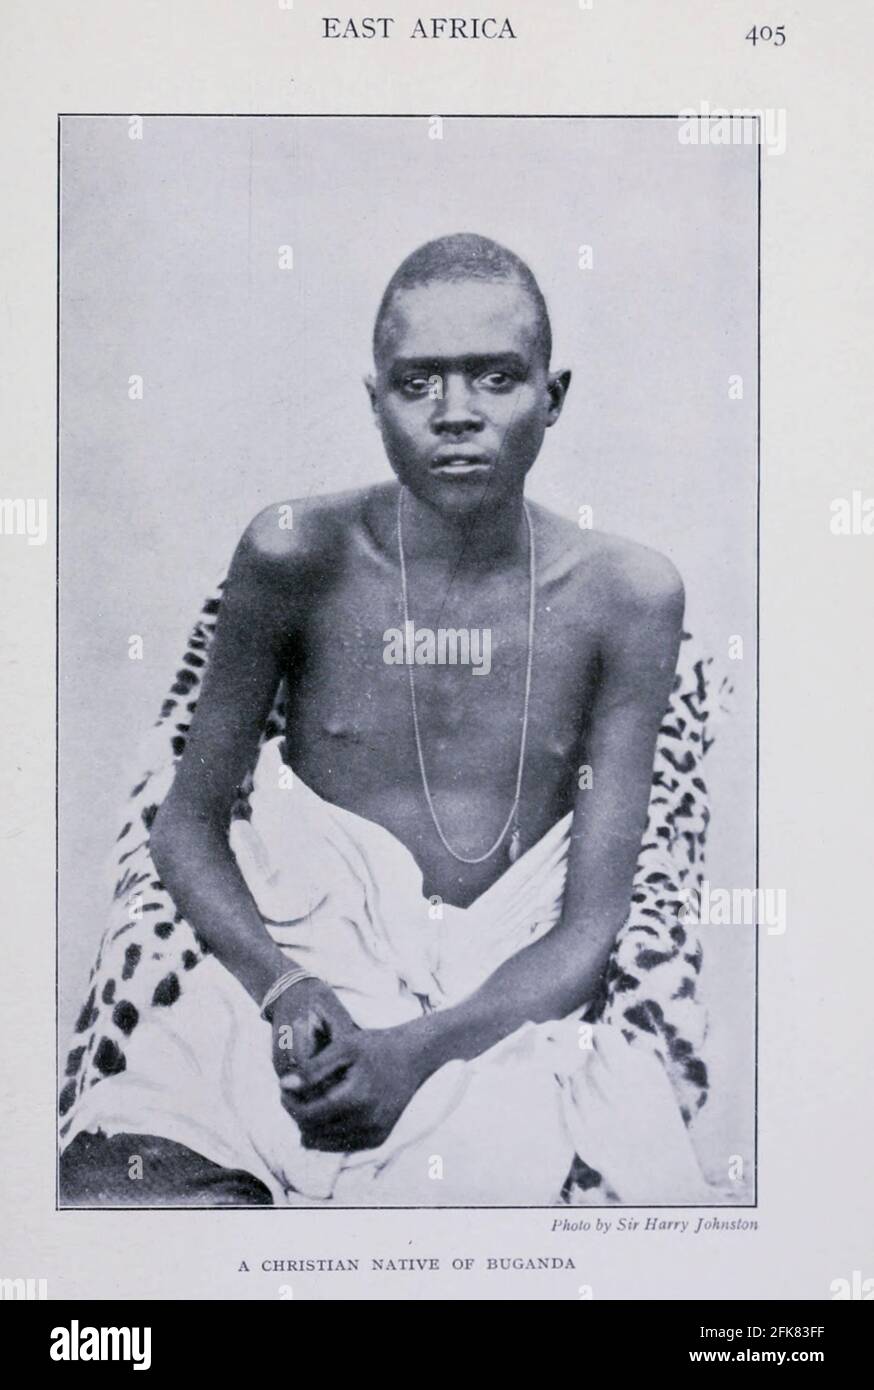 A Christian Native Of Buganda [Uganda] From the Book '  Britain across the seas : Africa : a history and description of the British Empire in Africa ' by Johnston, Harry Hamilton, Sir, 1858-1927 Published in 1910 in London by National Society's Depository Stock Photo